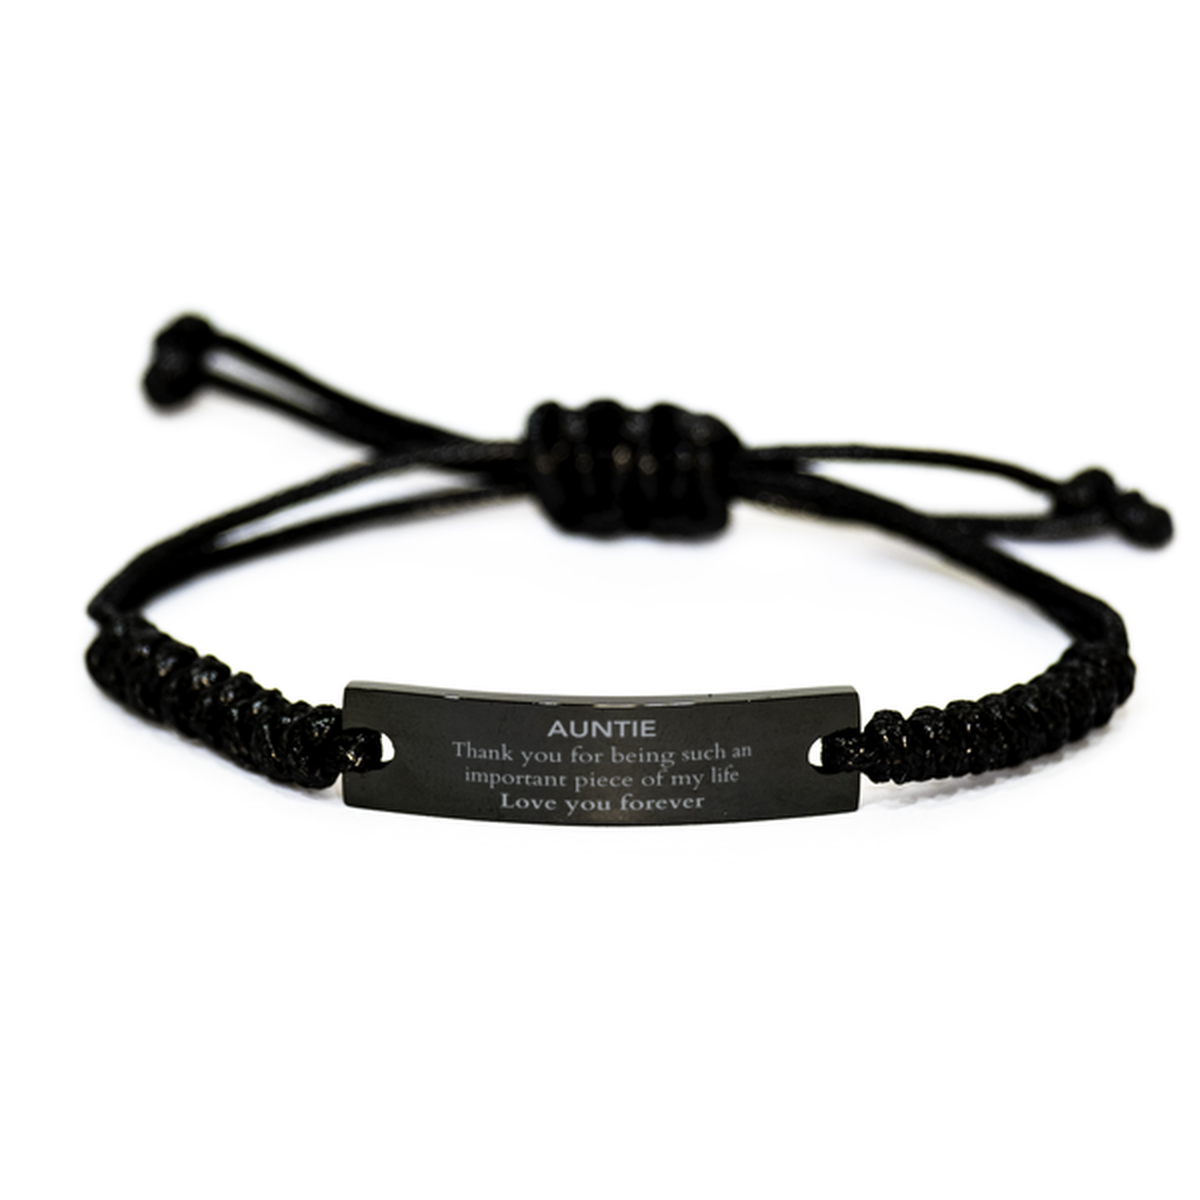 Appropriate Auntie Black Rope Bracelet Epic Birthday Gifts for Auntie Thank you for being such an important piece of my life Auntie Christmas Mothers Fathers Day